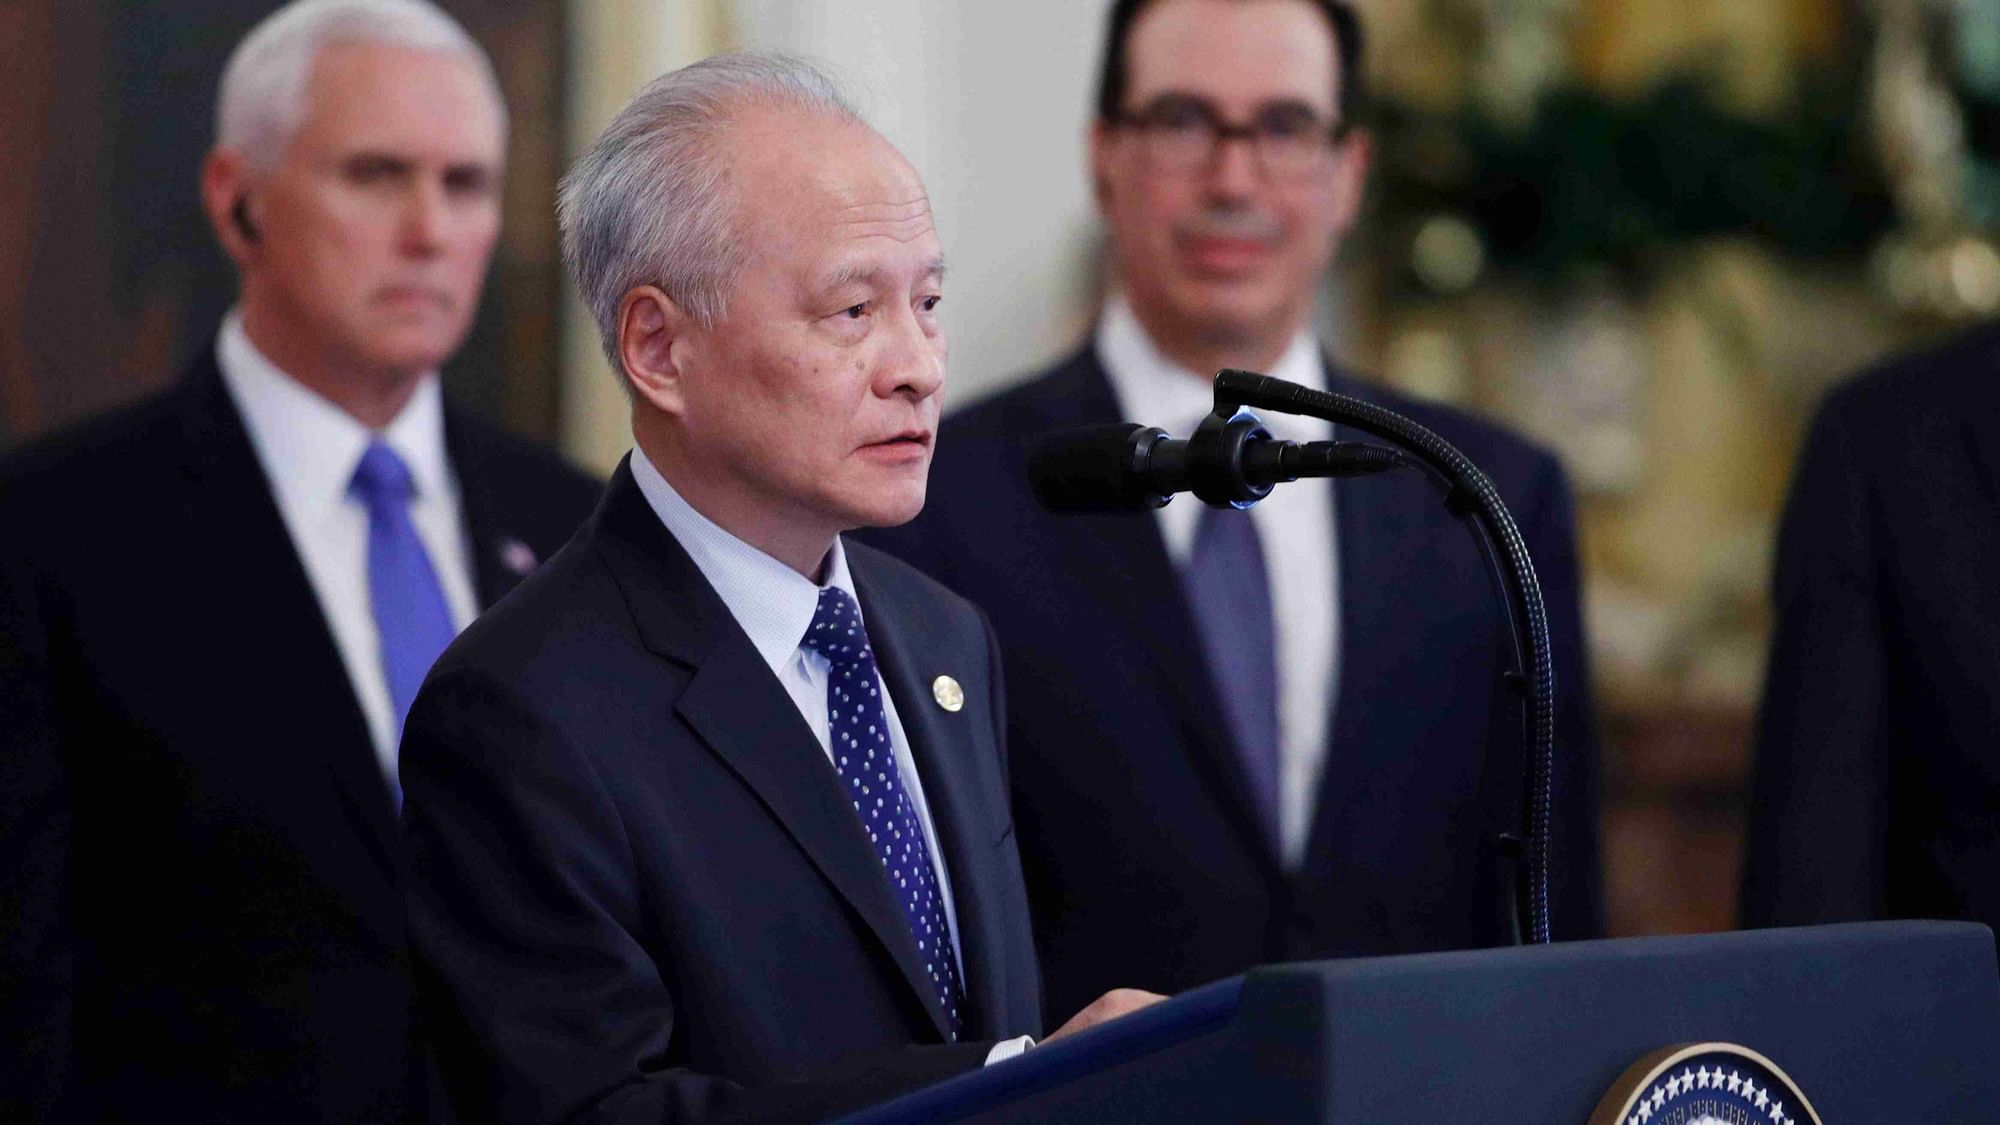 China’s Ambassador to the US Cui Tiankai was summoned after Chinese Foreign Ministry spokesman Zhao Lijian tweeted that the US military had brought the virus to China. 